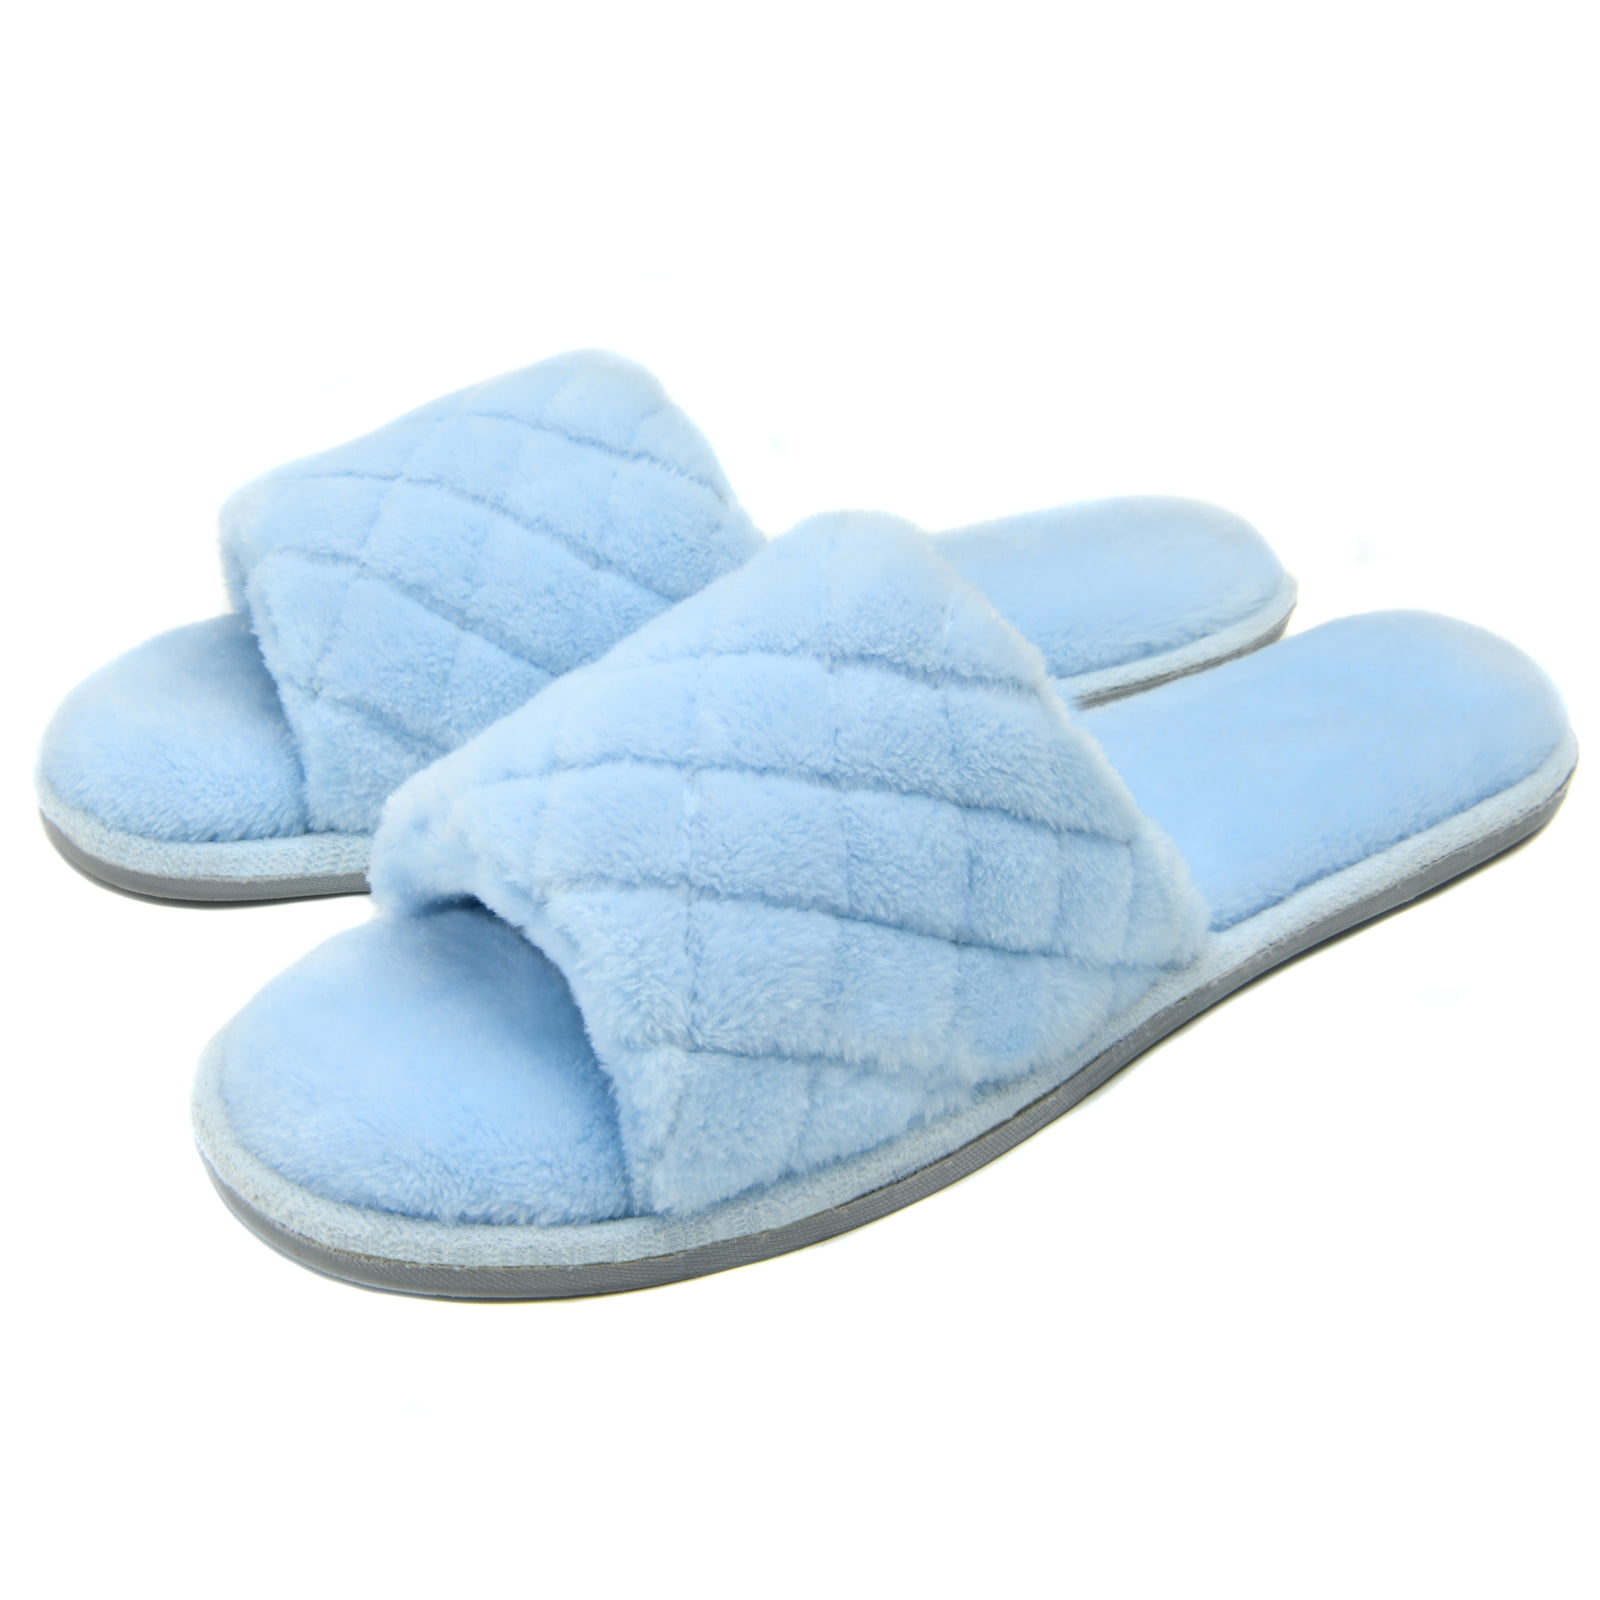 LORDFON Open Toe Womens Slippers Slip-On House Slippers with Memory ...